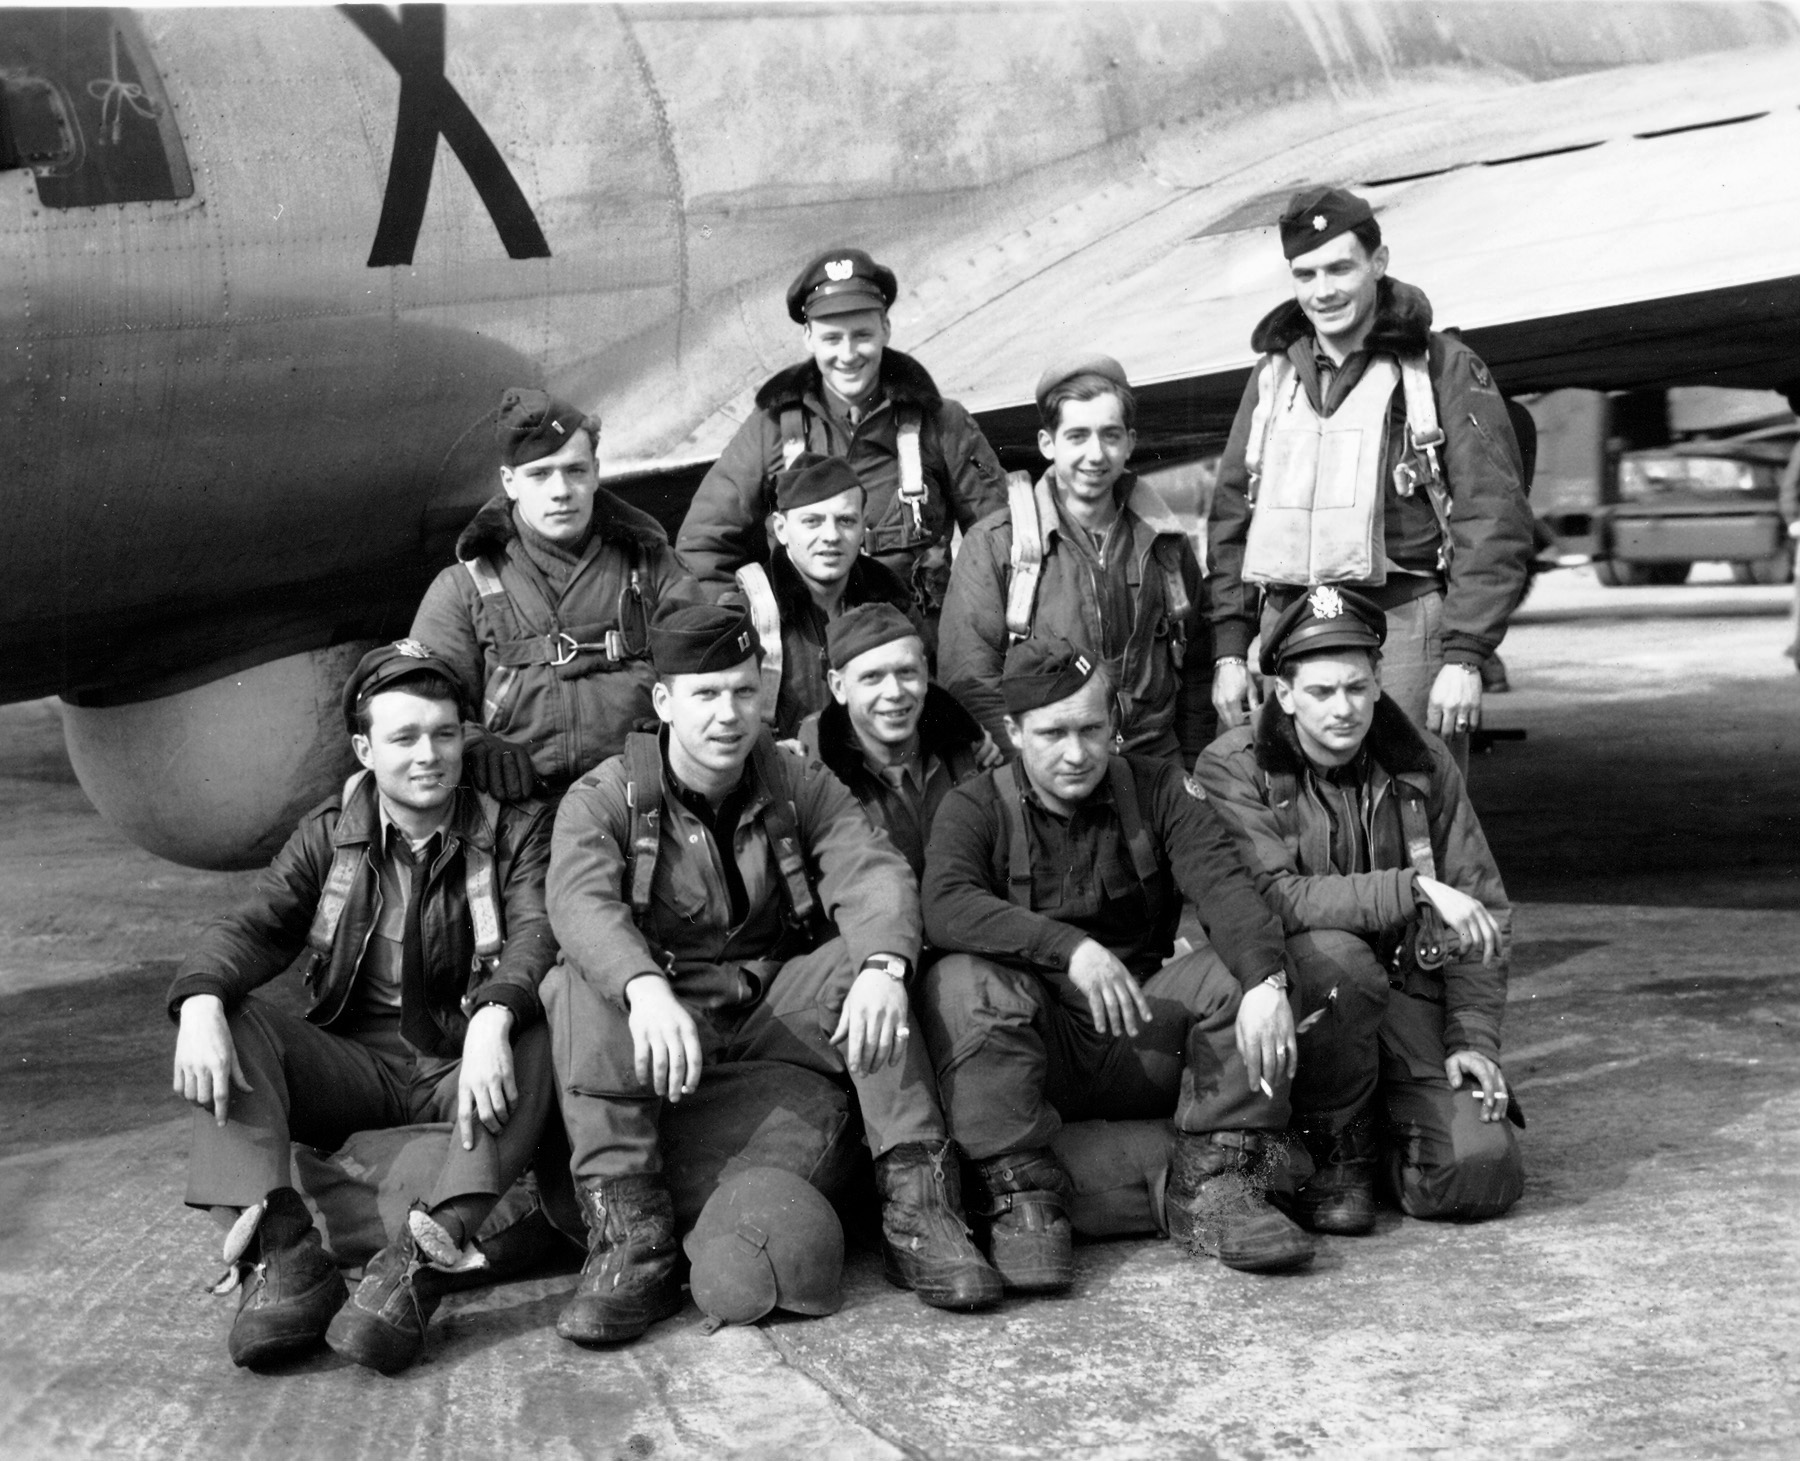 Bill O’Leary (384th BG) and his crew. He said flak was so thick “You could walk on it." 